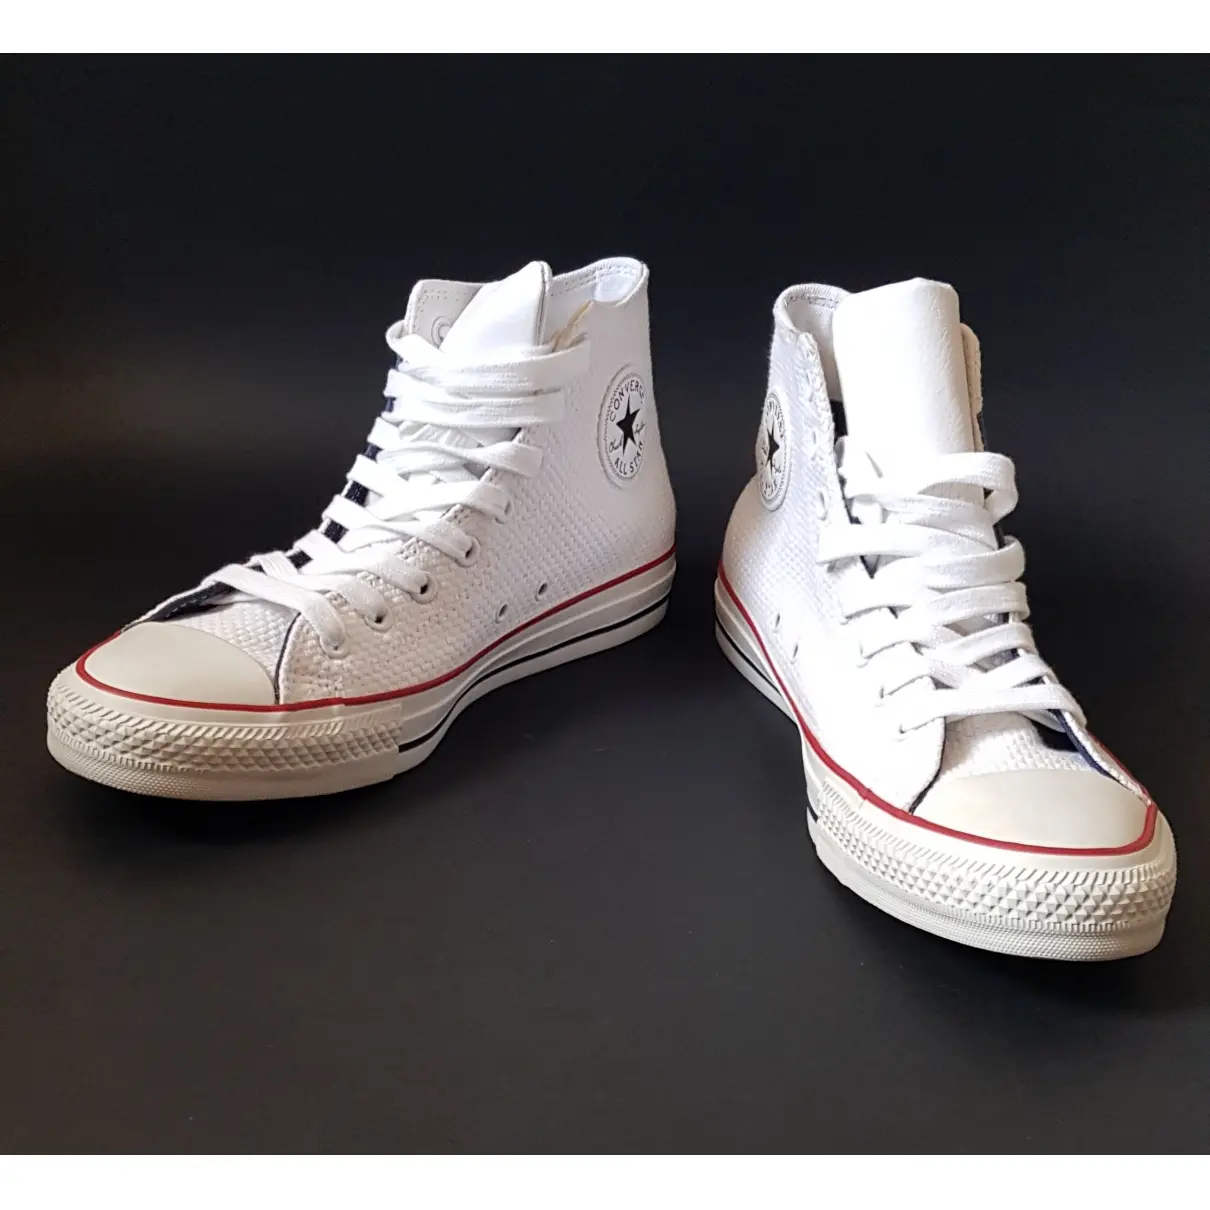 Buy Converse Cloth high trainers online